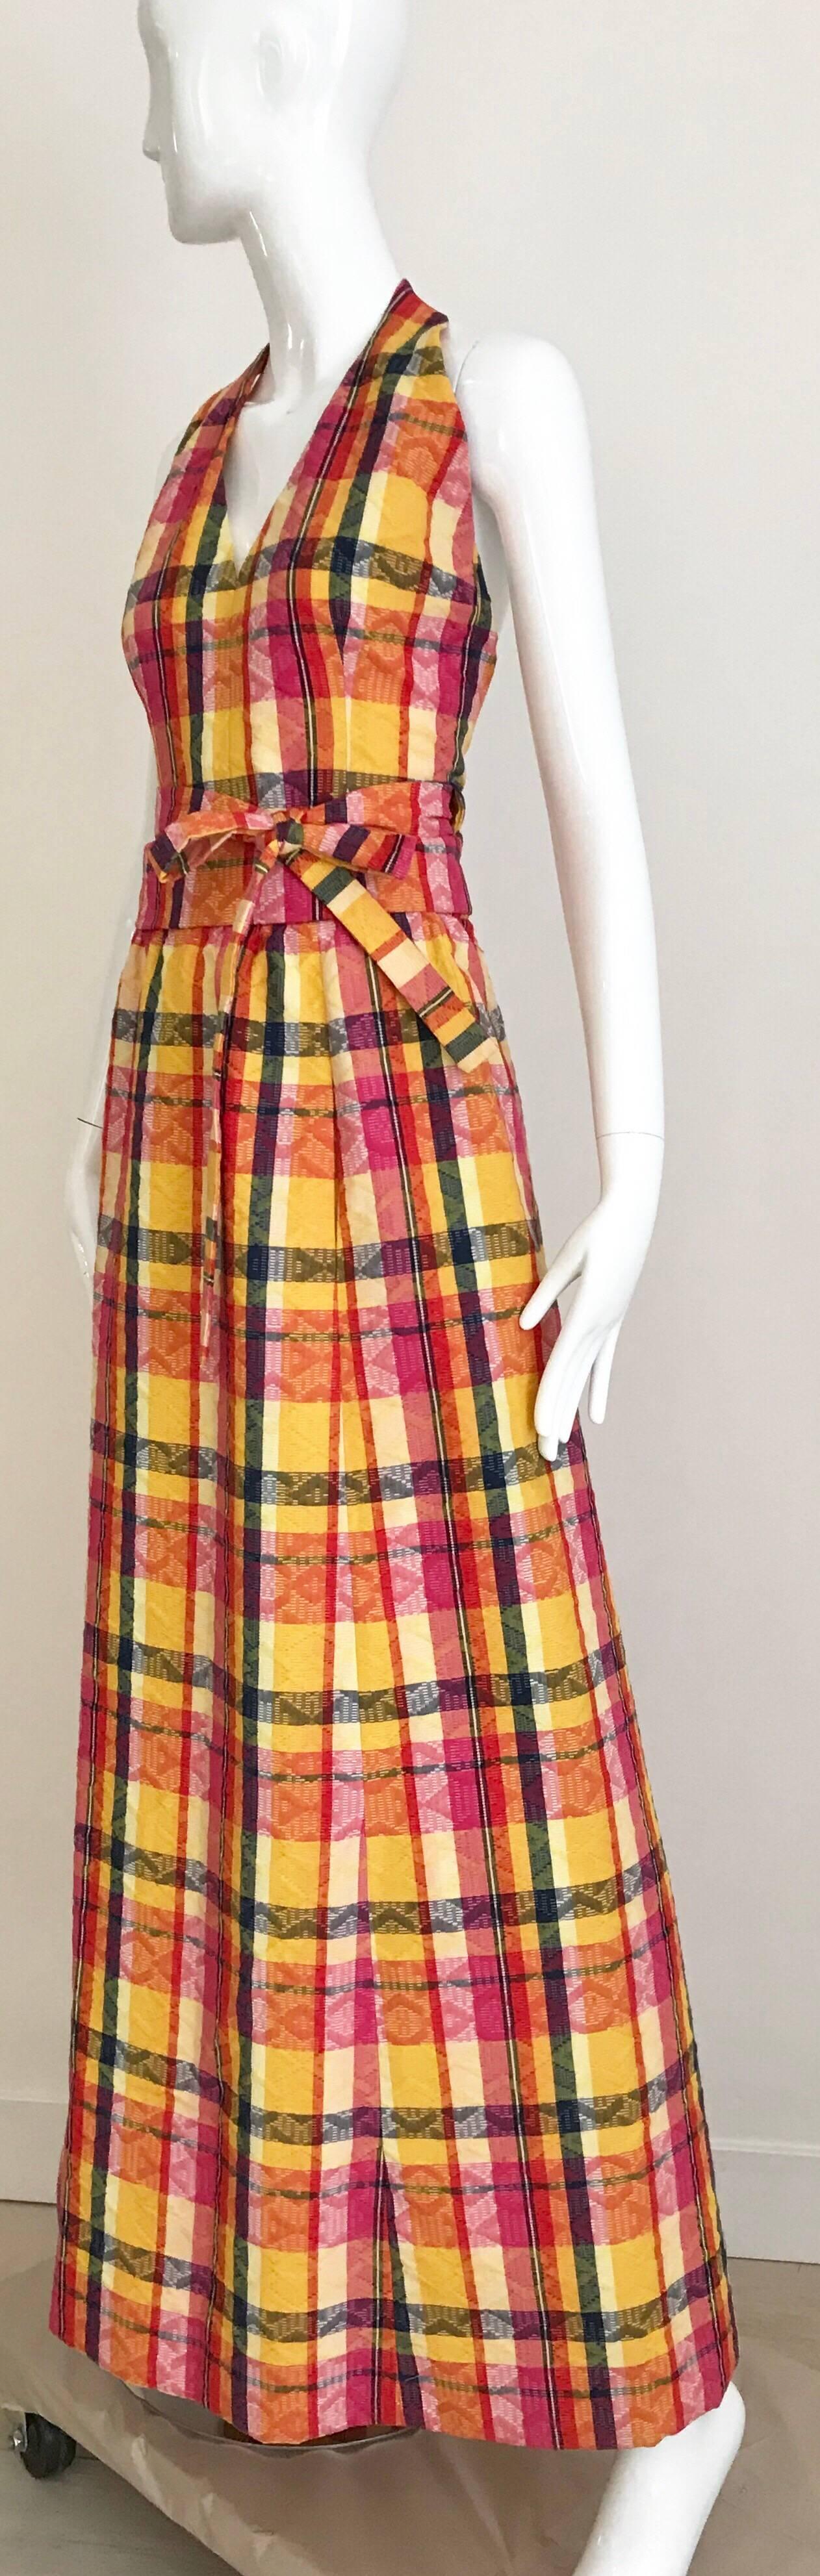 Givenchy Yellow and Orange Plaid Halter Top and Skirt set, 1970s  For Sale 1